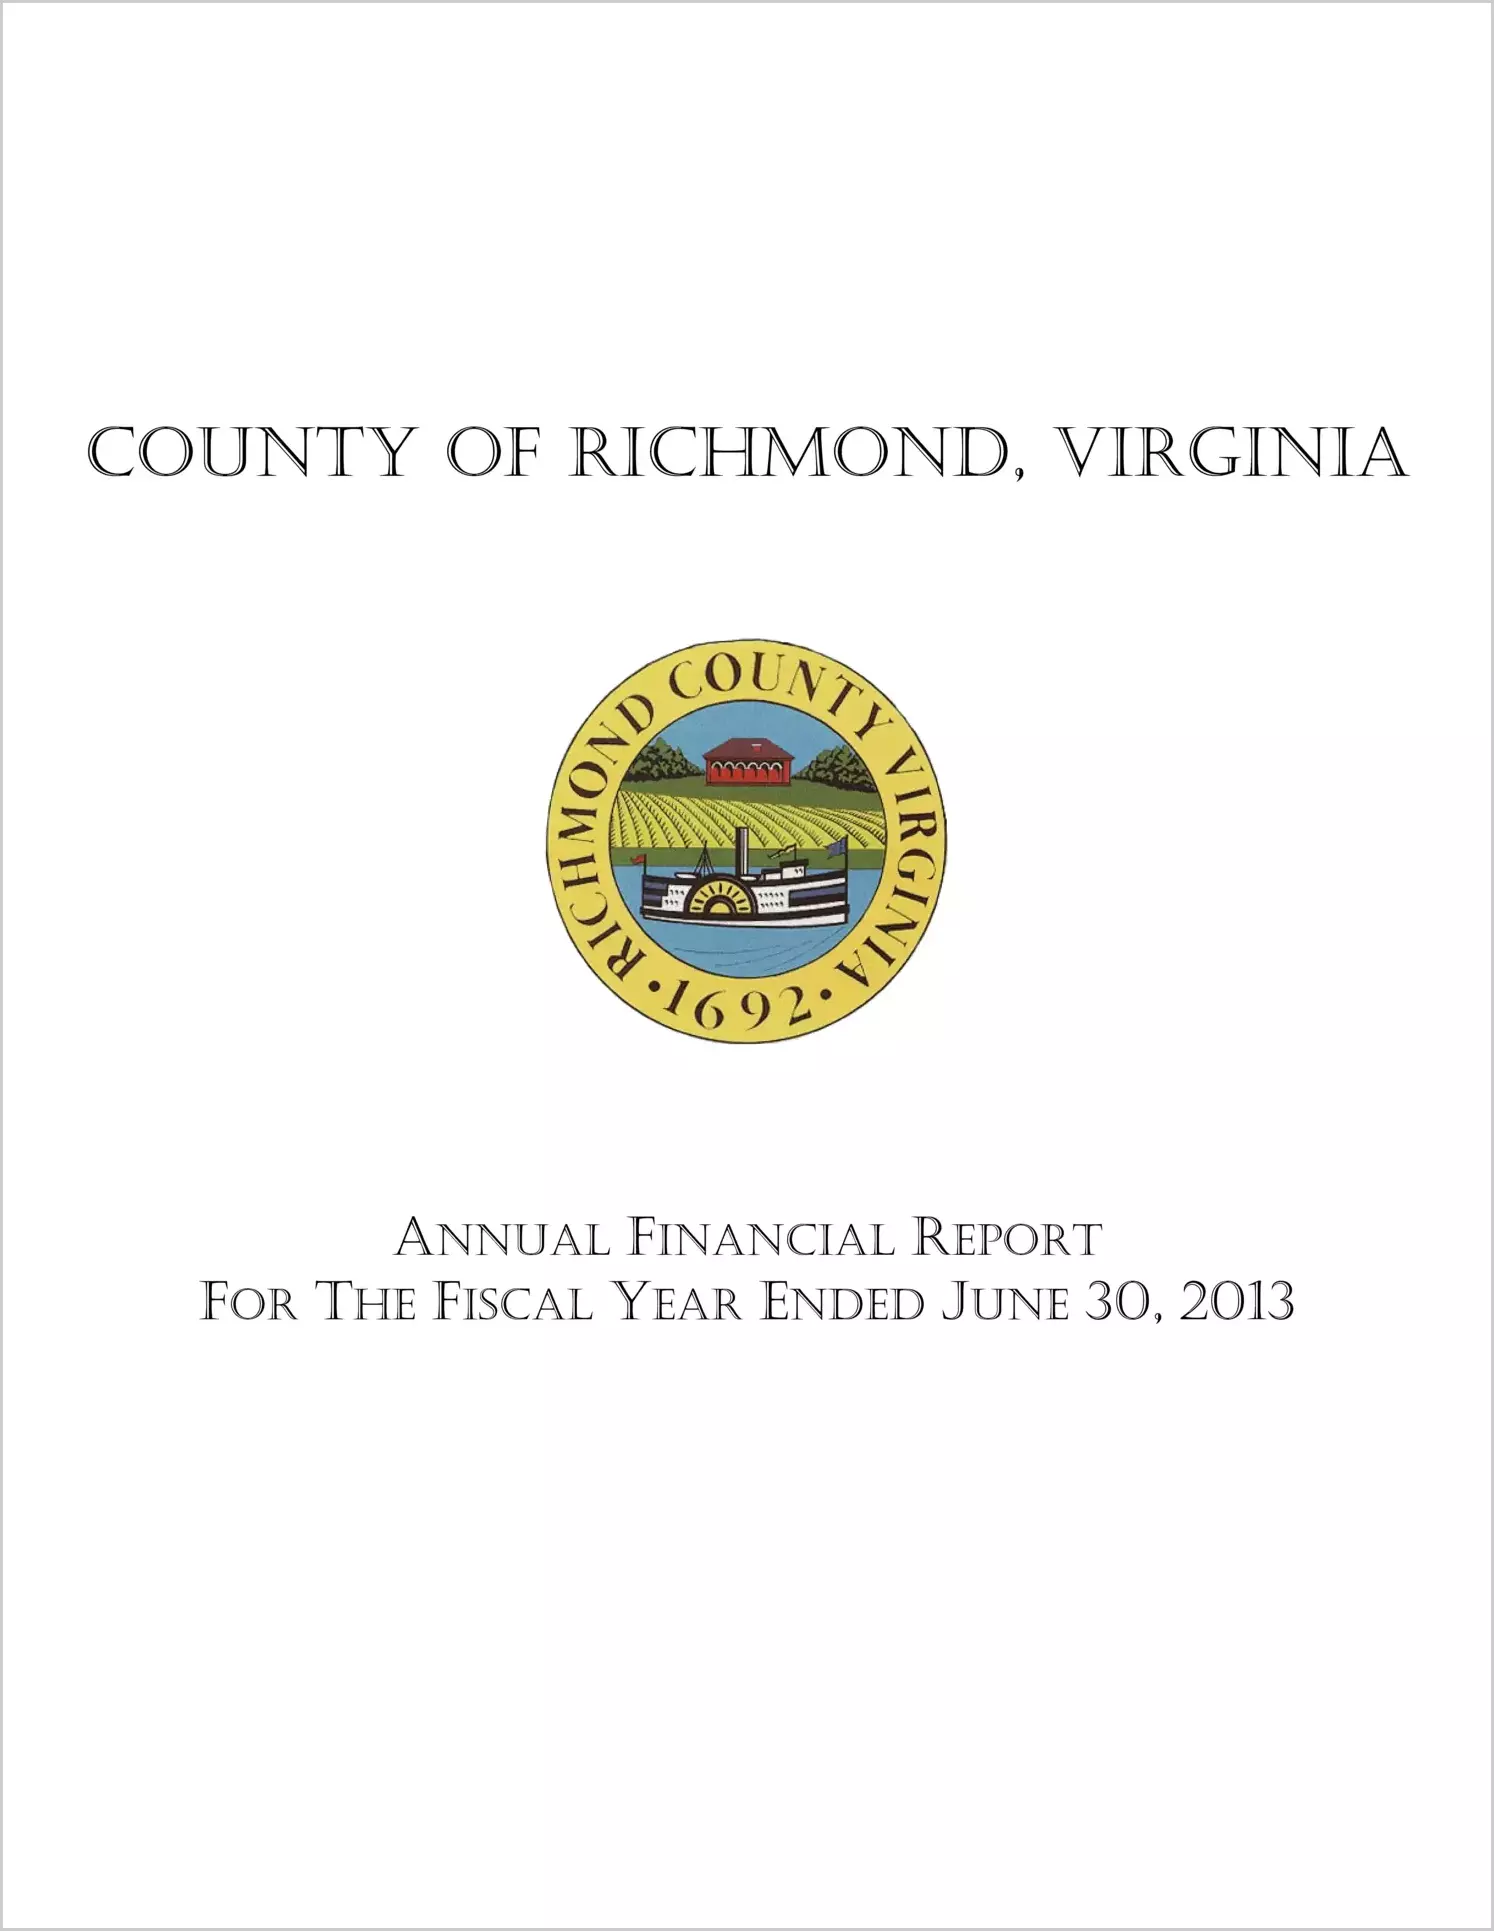 2013 Annual Financial Report for County of Richmond